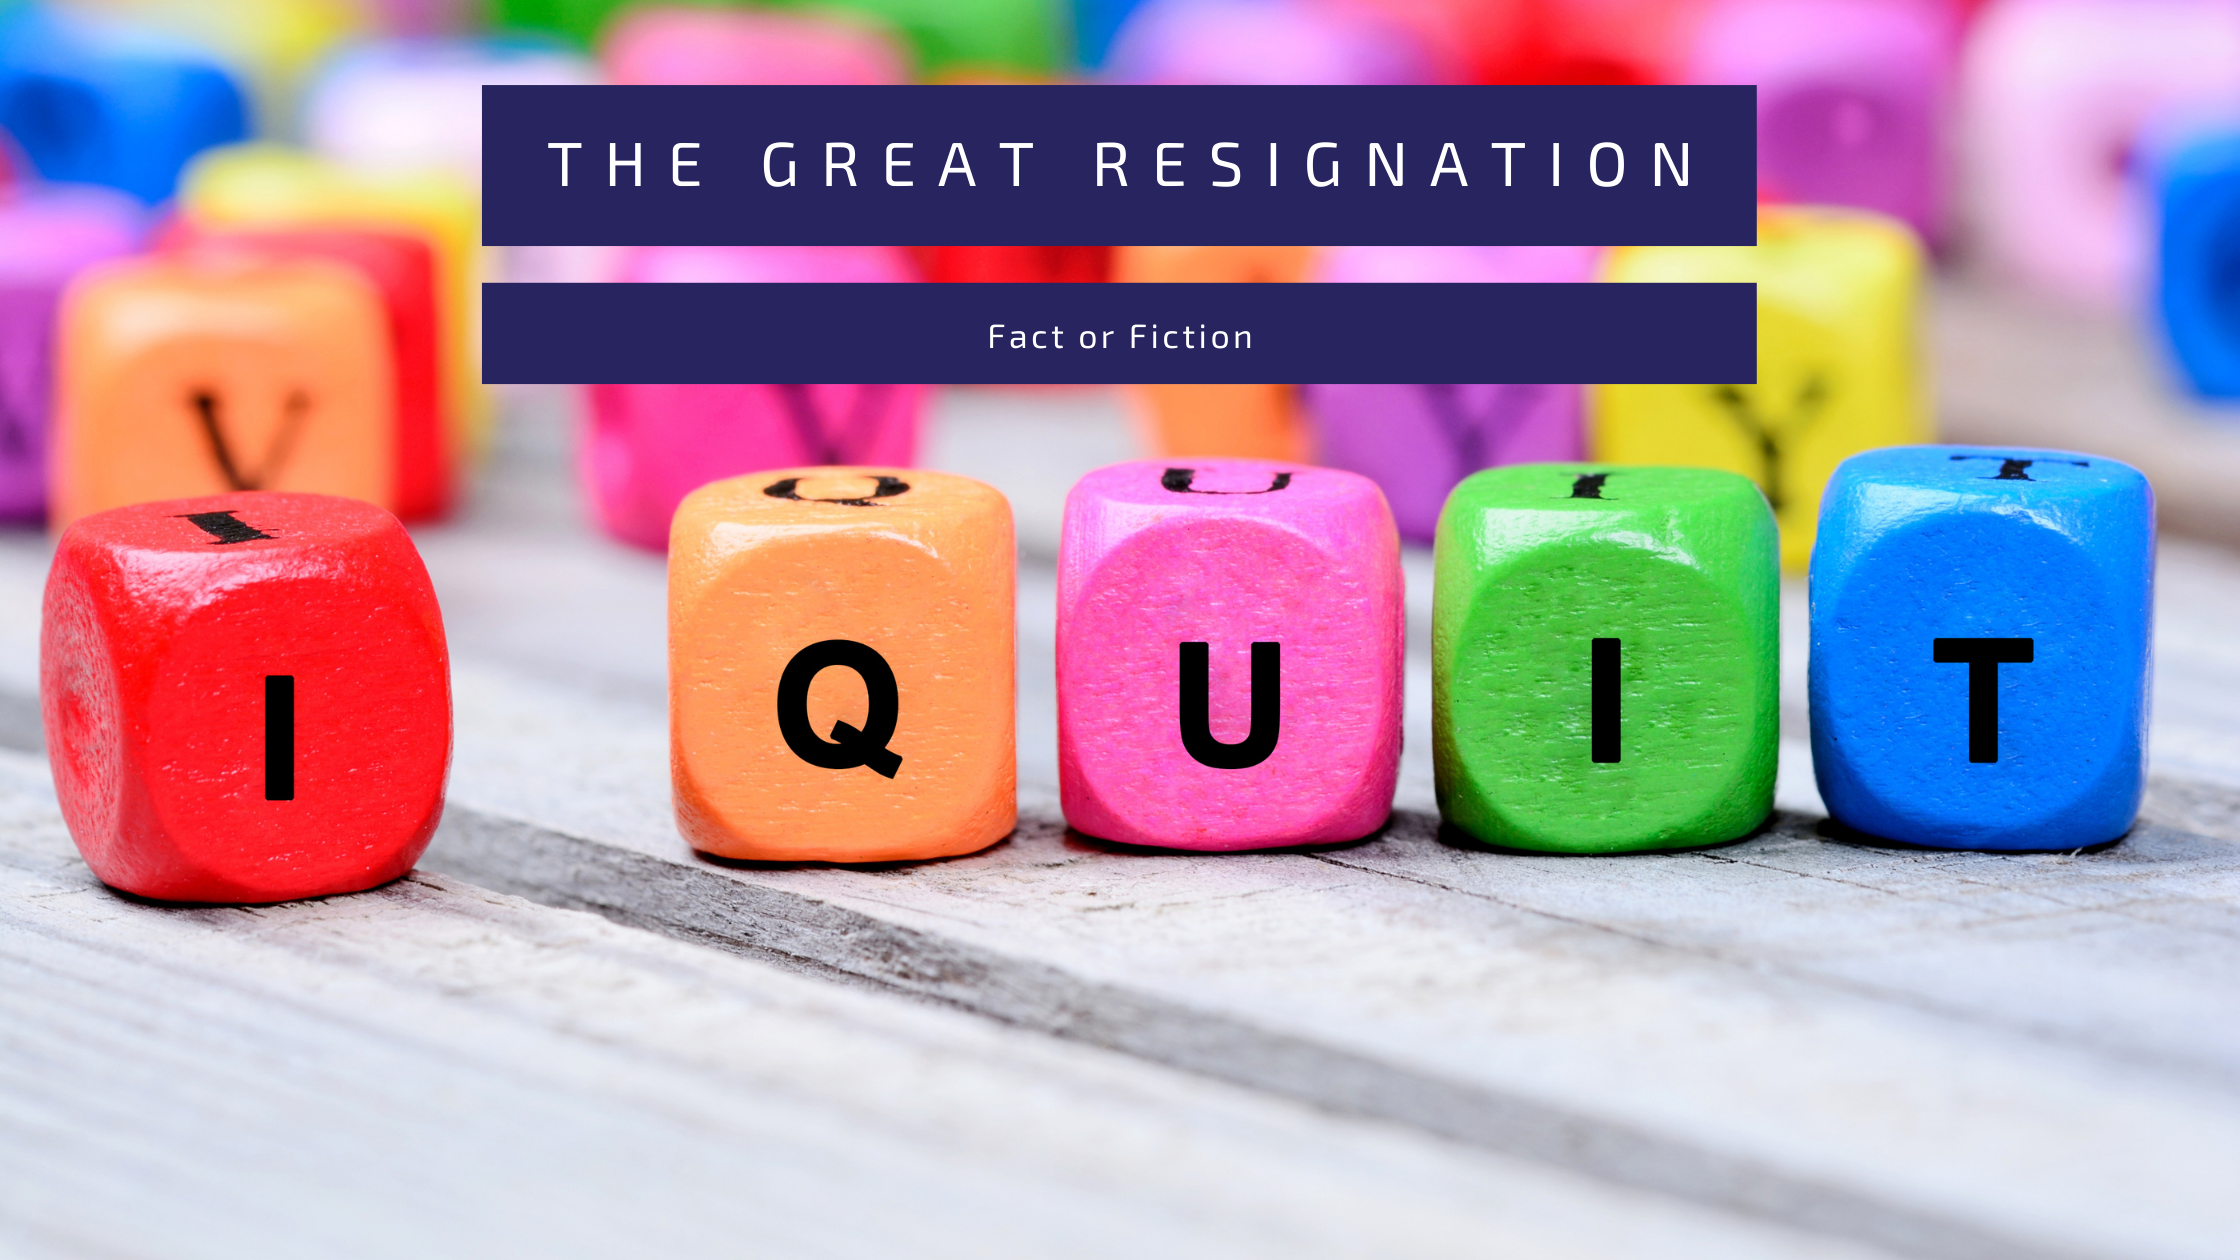 The Great Resignation, Fact or Fiction?